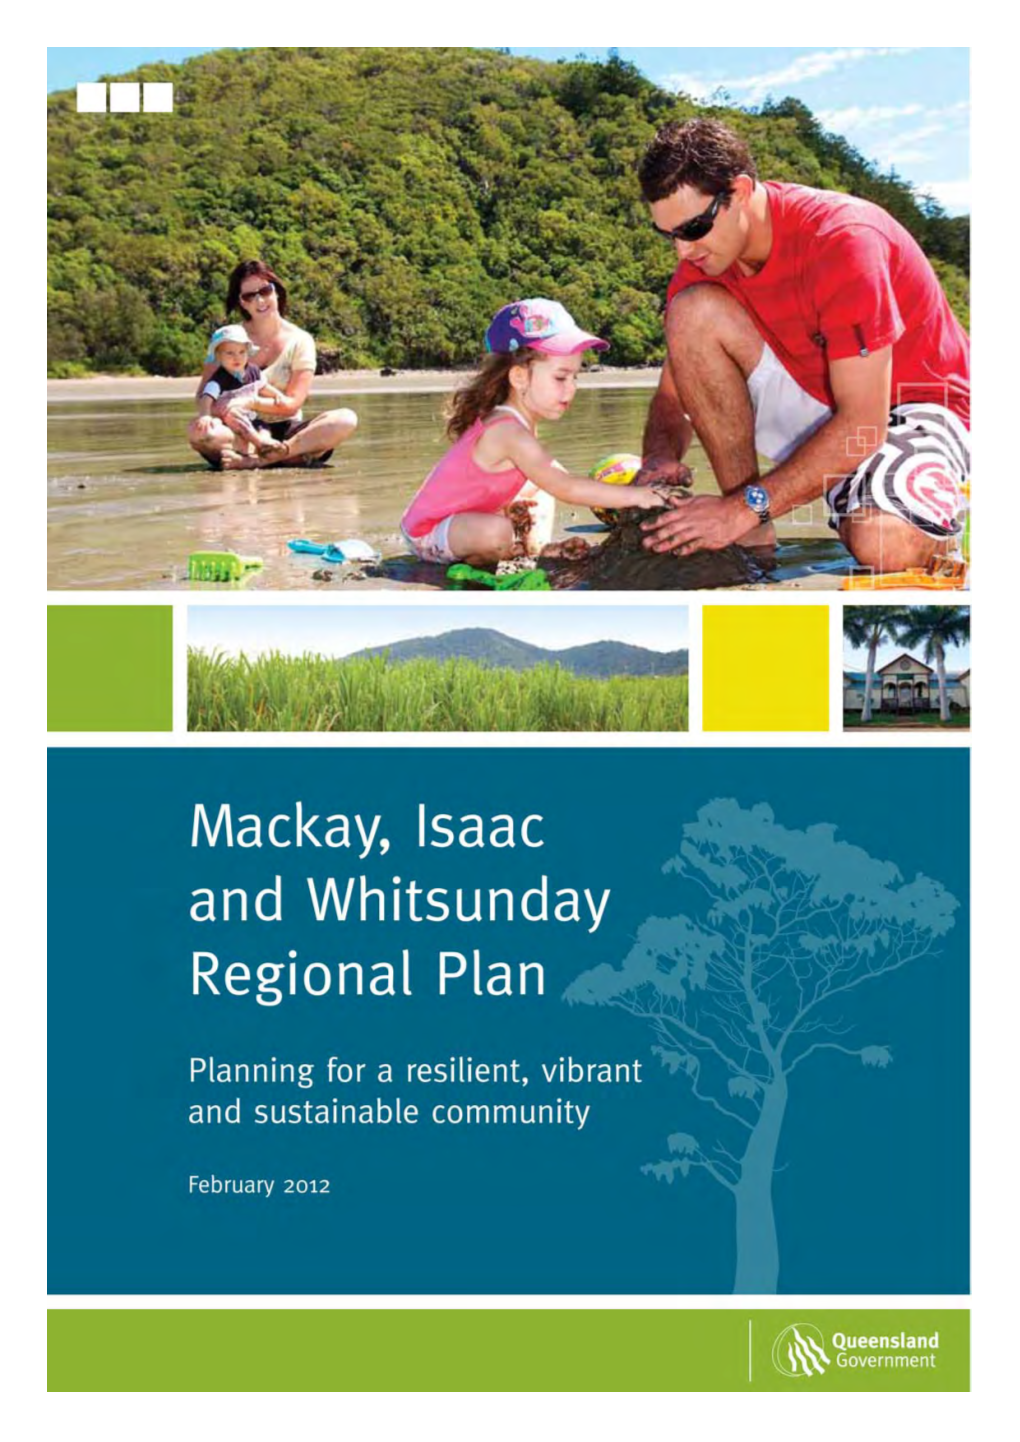 Mackay, Isaac and Whitsunday Regional Plan 2012 3 Table of Contents (Continued) 7.2 Planning for Growth